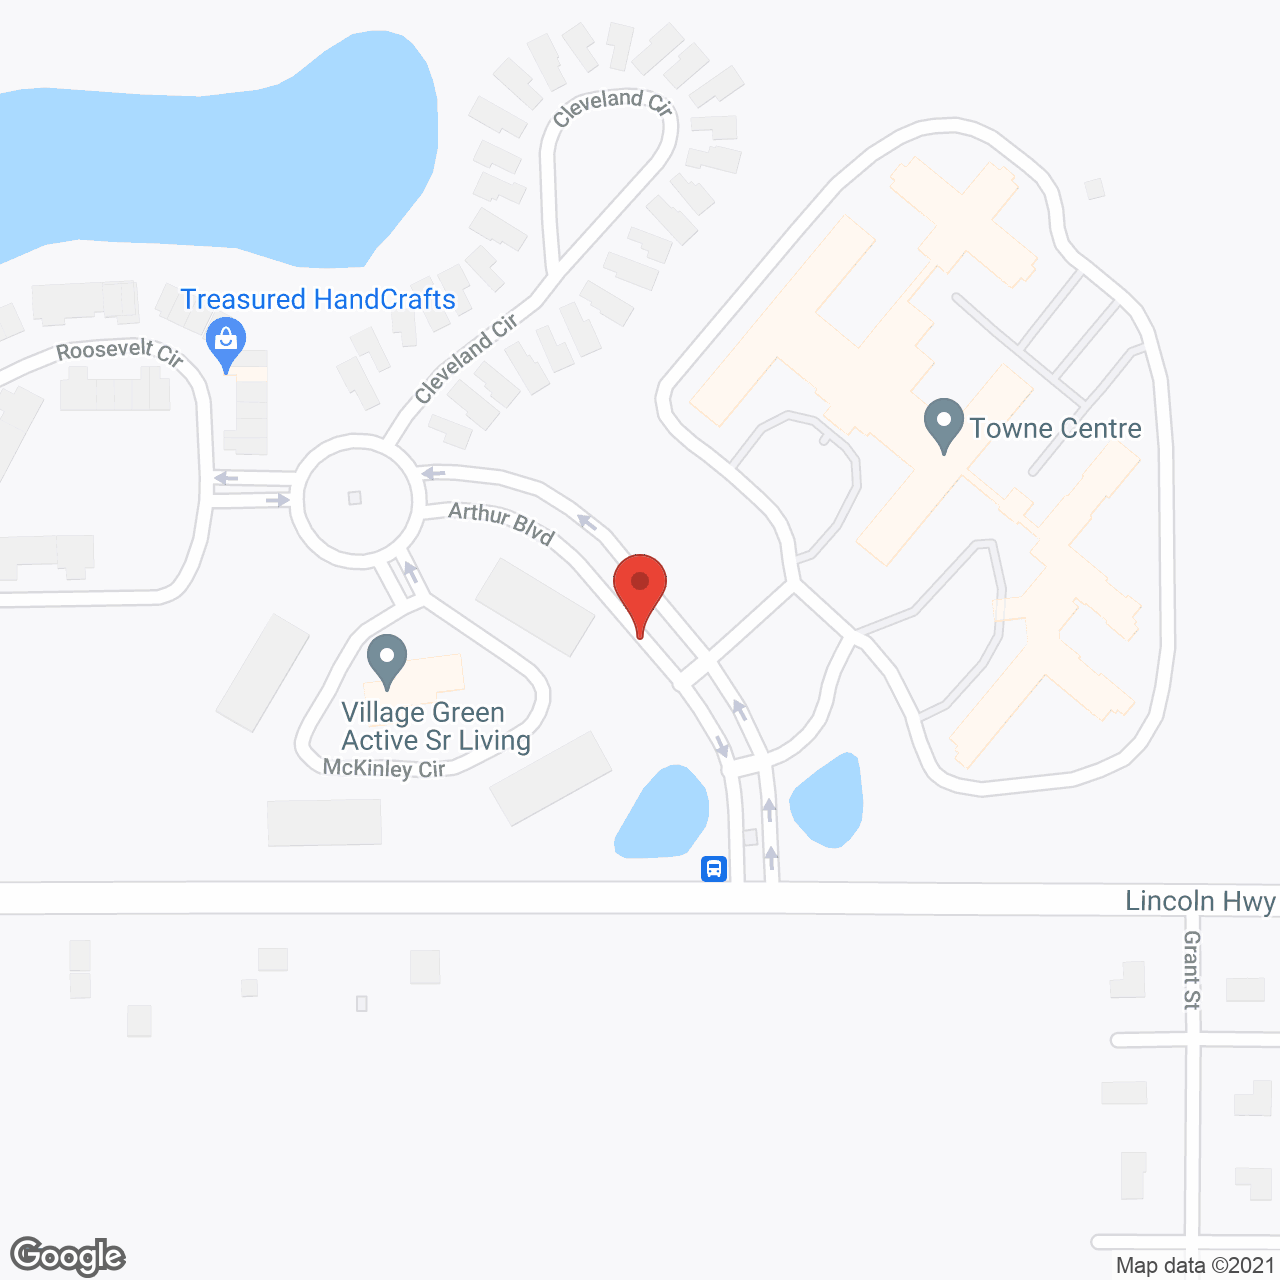 Towne Centre in google map